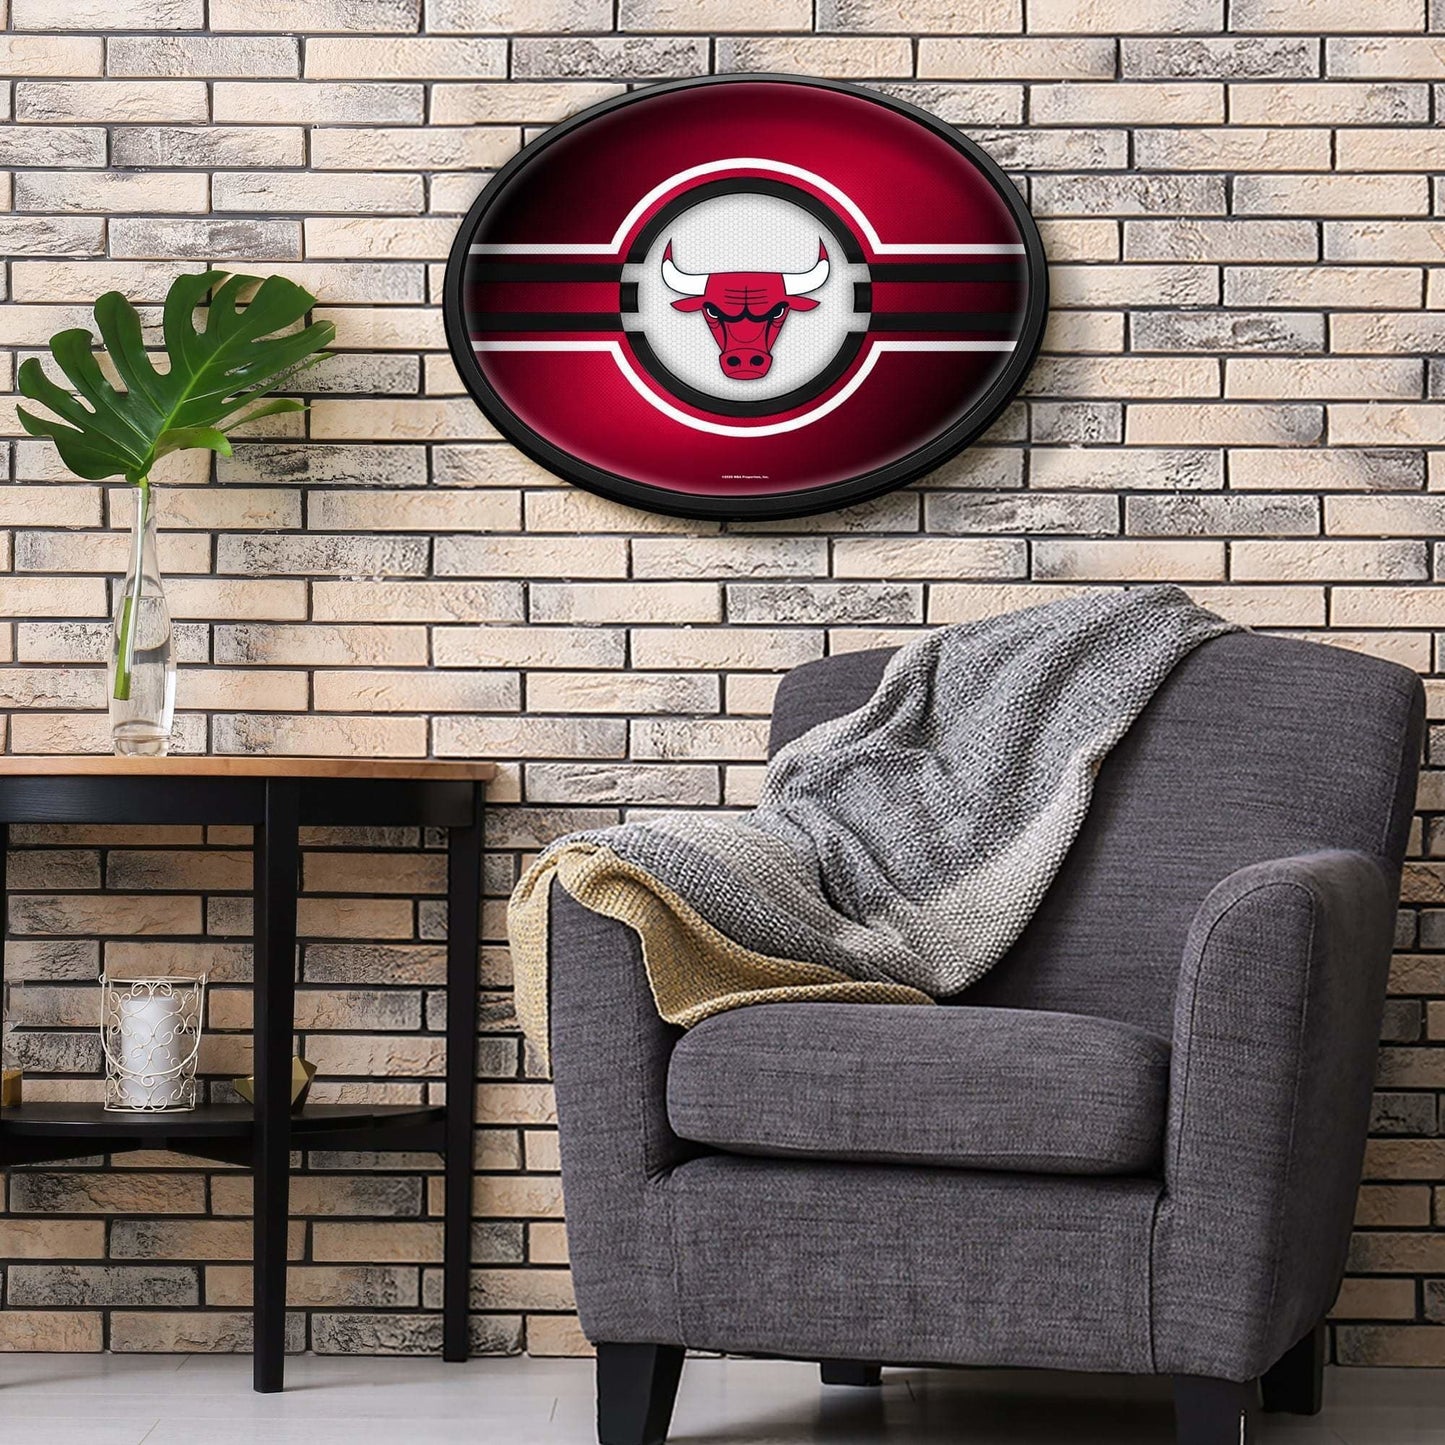 Chicago Bulls: Oval Slimline Lighted Wall Sign - The Fan-Brand